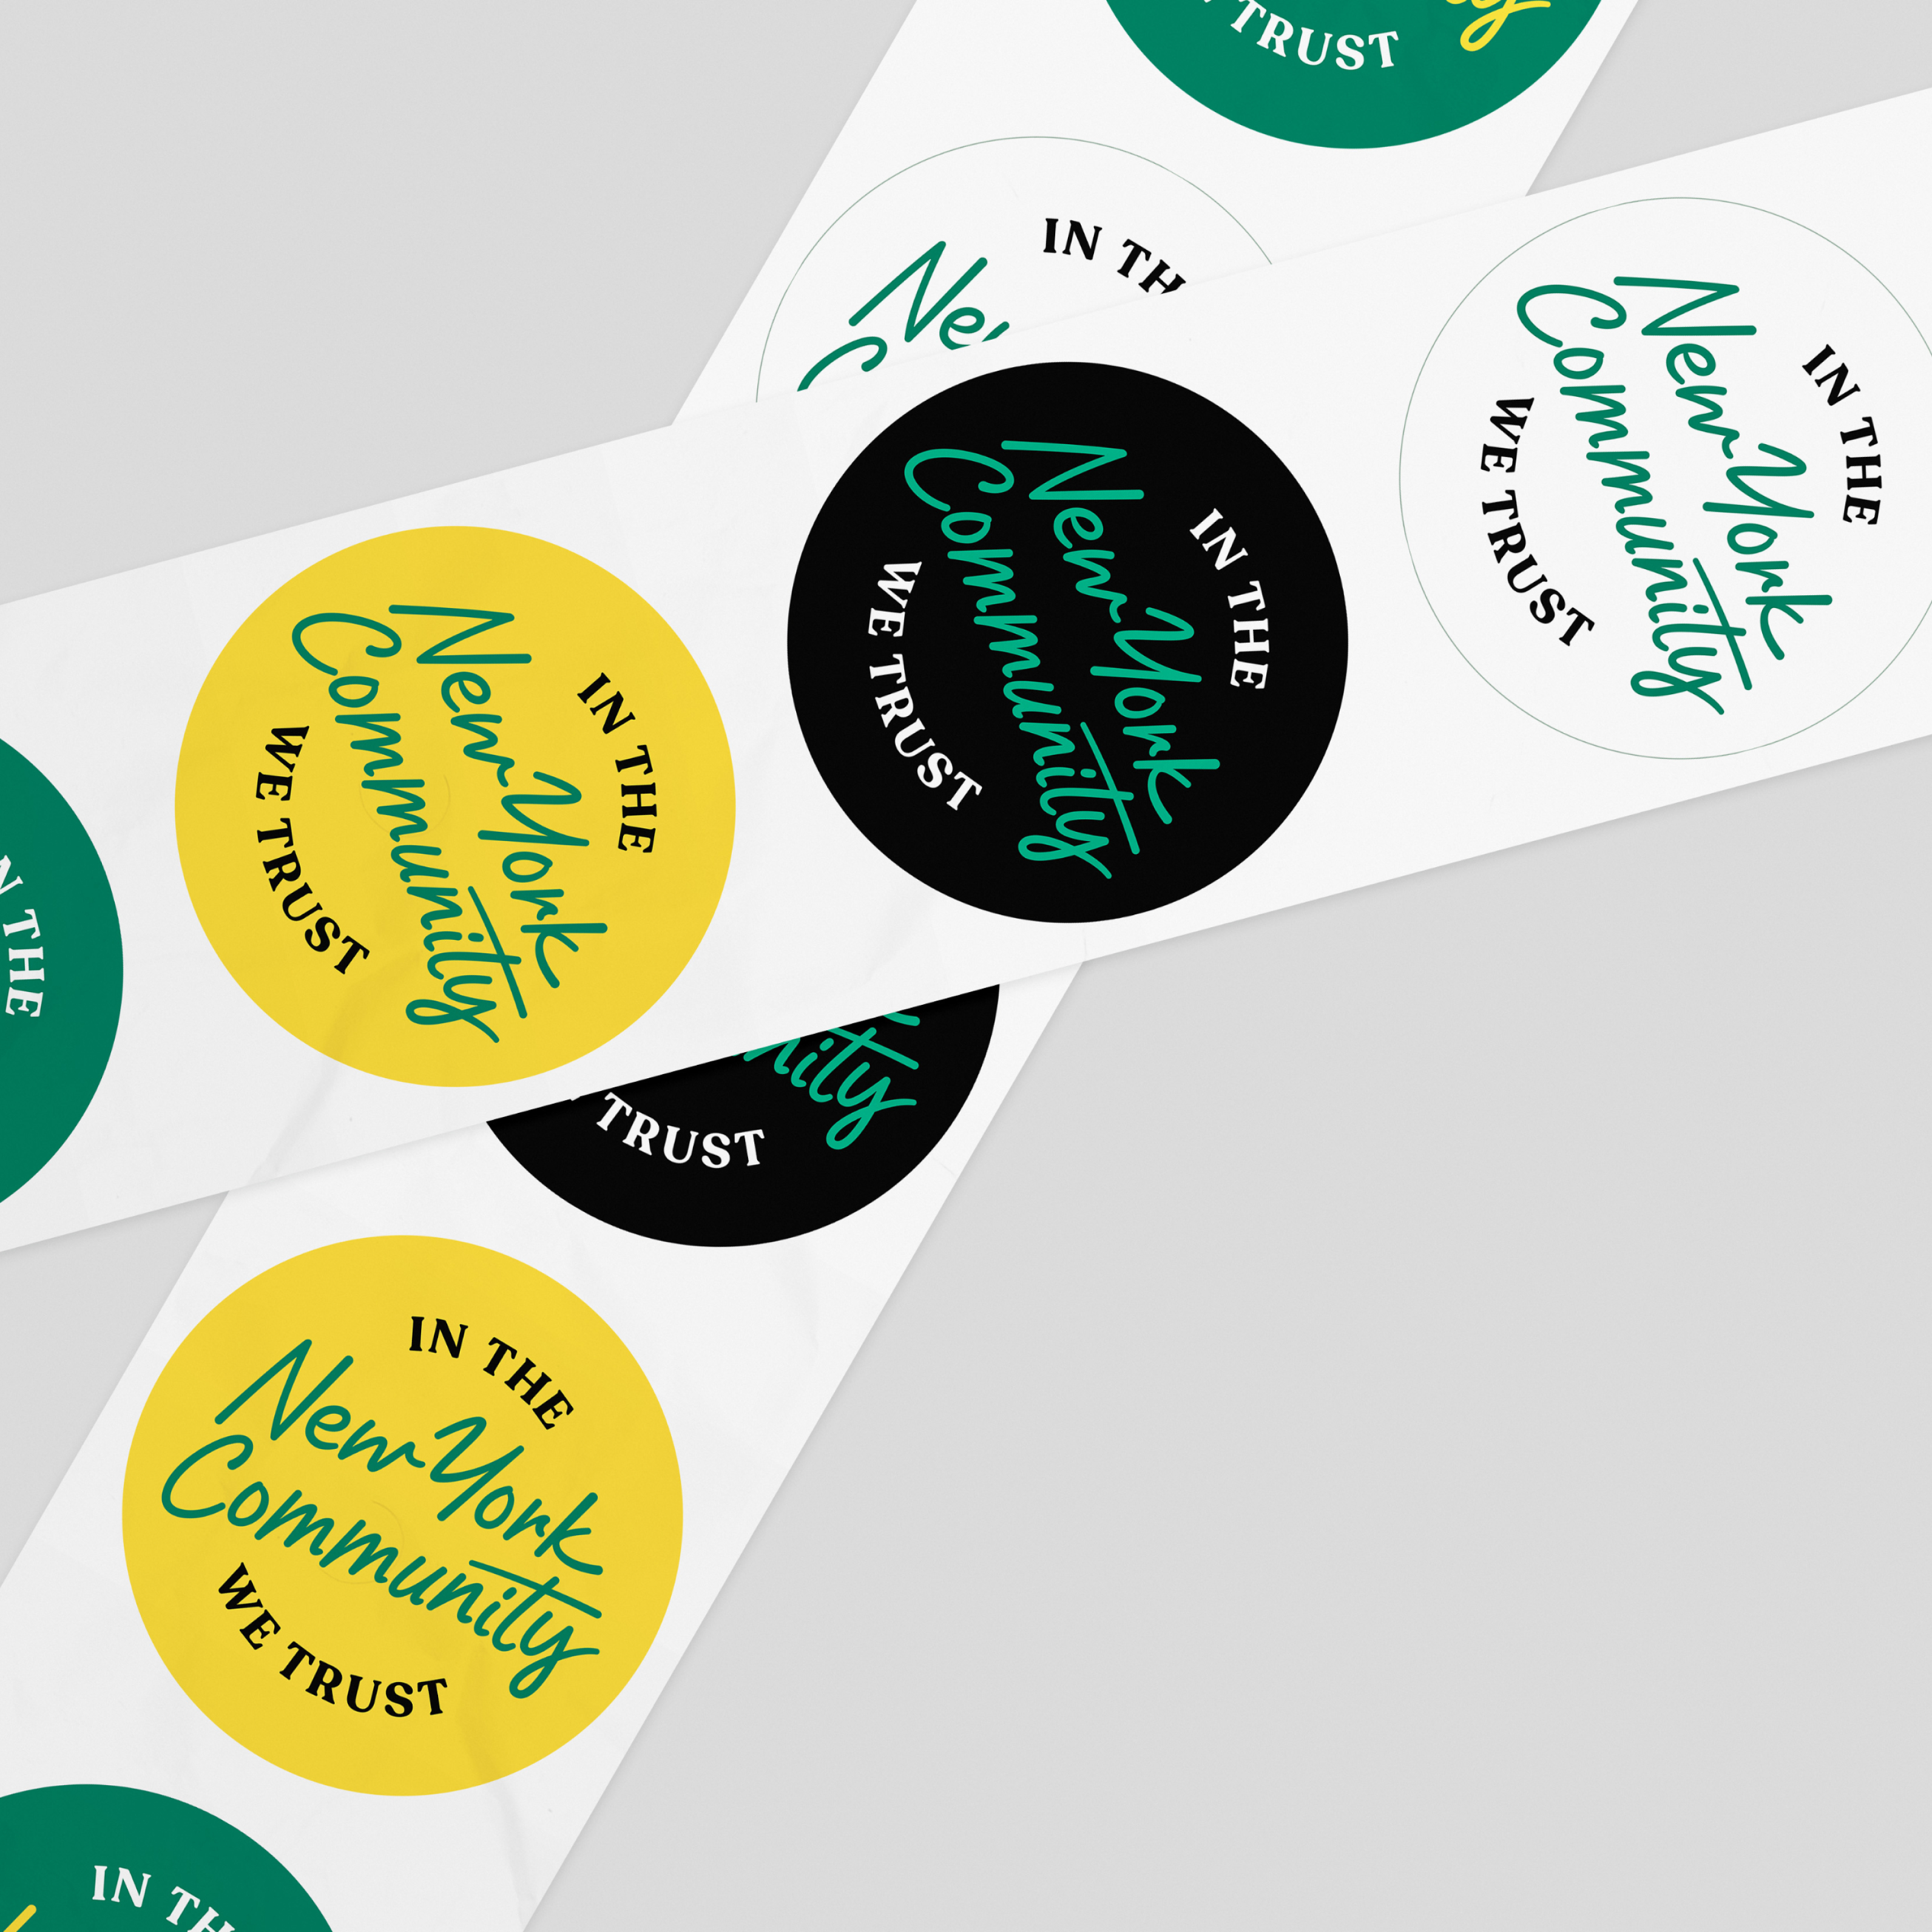 A set of round stickers with the phrases "In the New York Community We Trust" in various colors and fonts. The stickers feature black, white, yellow, and shades of green backgrounds and are arranged in a crisscross pattern on a light gray surface.